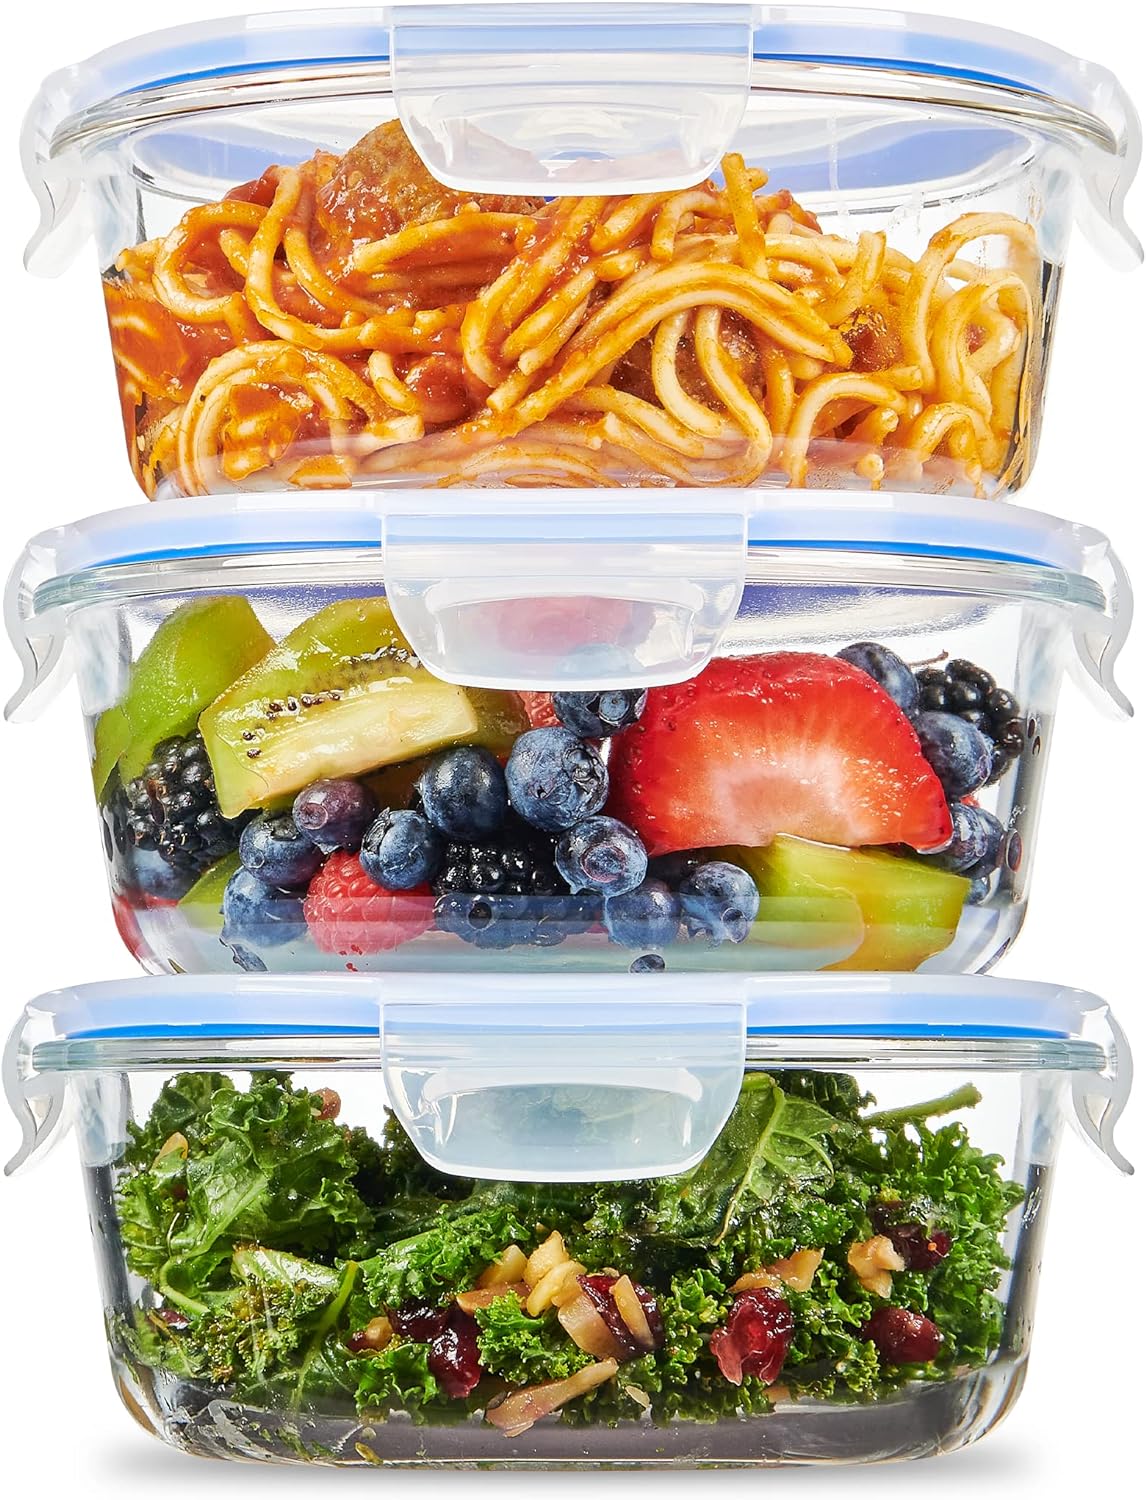 FineDine 6-Piece Superior Glass Food Storage Containers Set, 32oz Capacity - Newly Innovated Hinged Locking lids - 100% Leakproof Glass Meal-Prep Containers, Freezer-to-Oven-Safe (Blue)